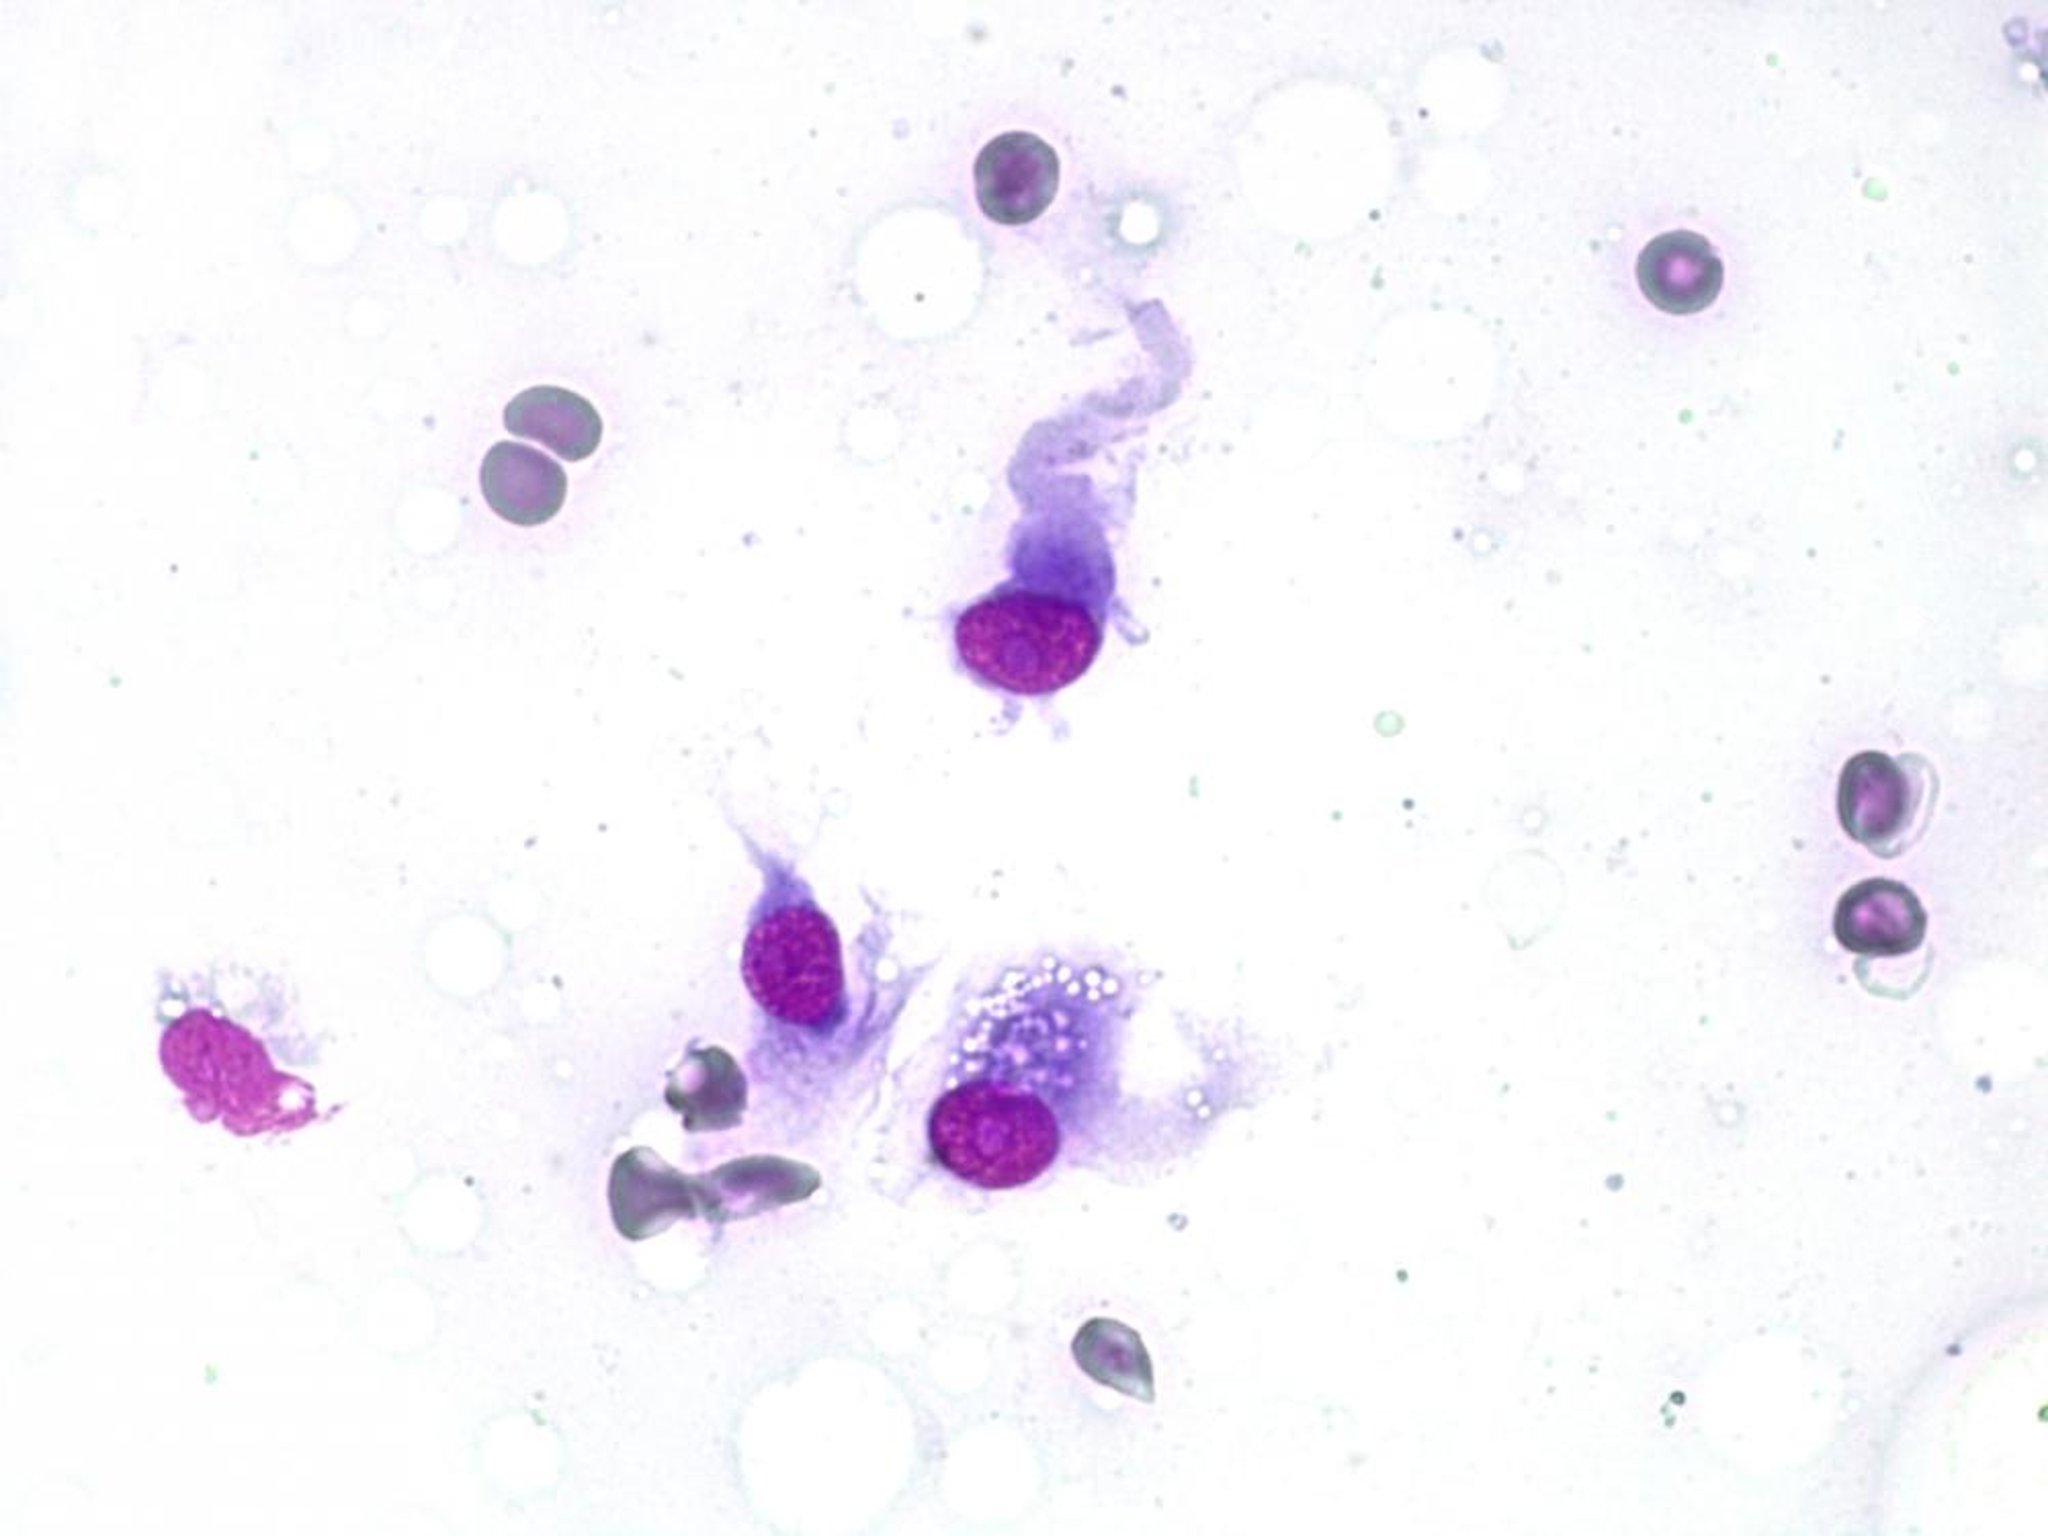 Mesenchymal, or spindle, cells